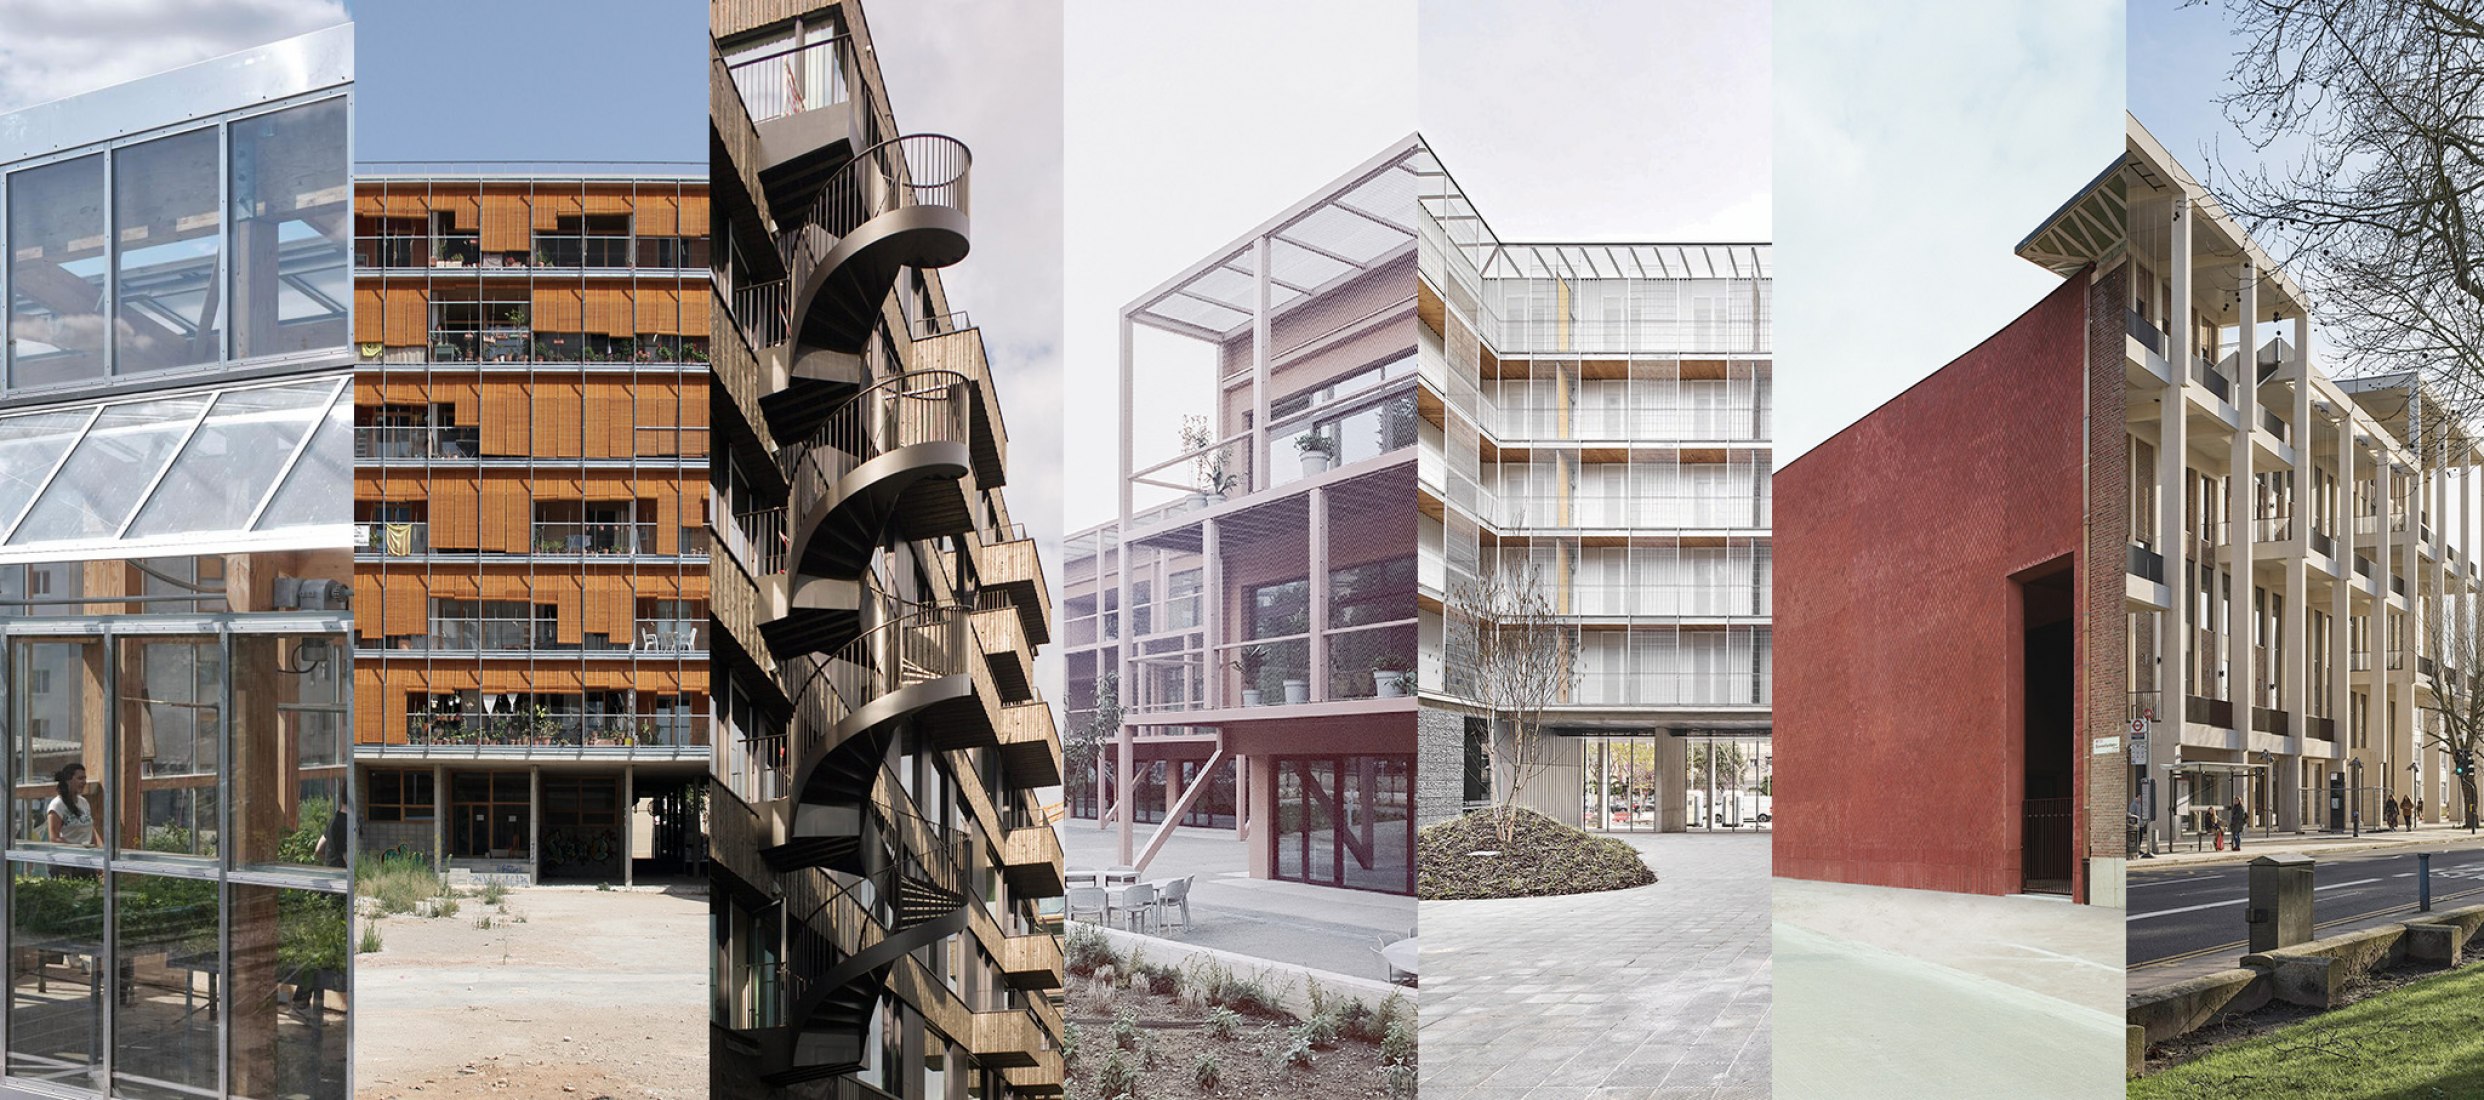 5 Architecture and 2 Emerging Architecture Finalists for the EU MIES AWARD 2022